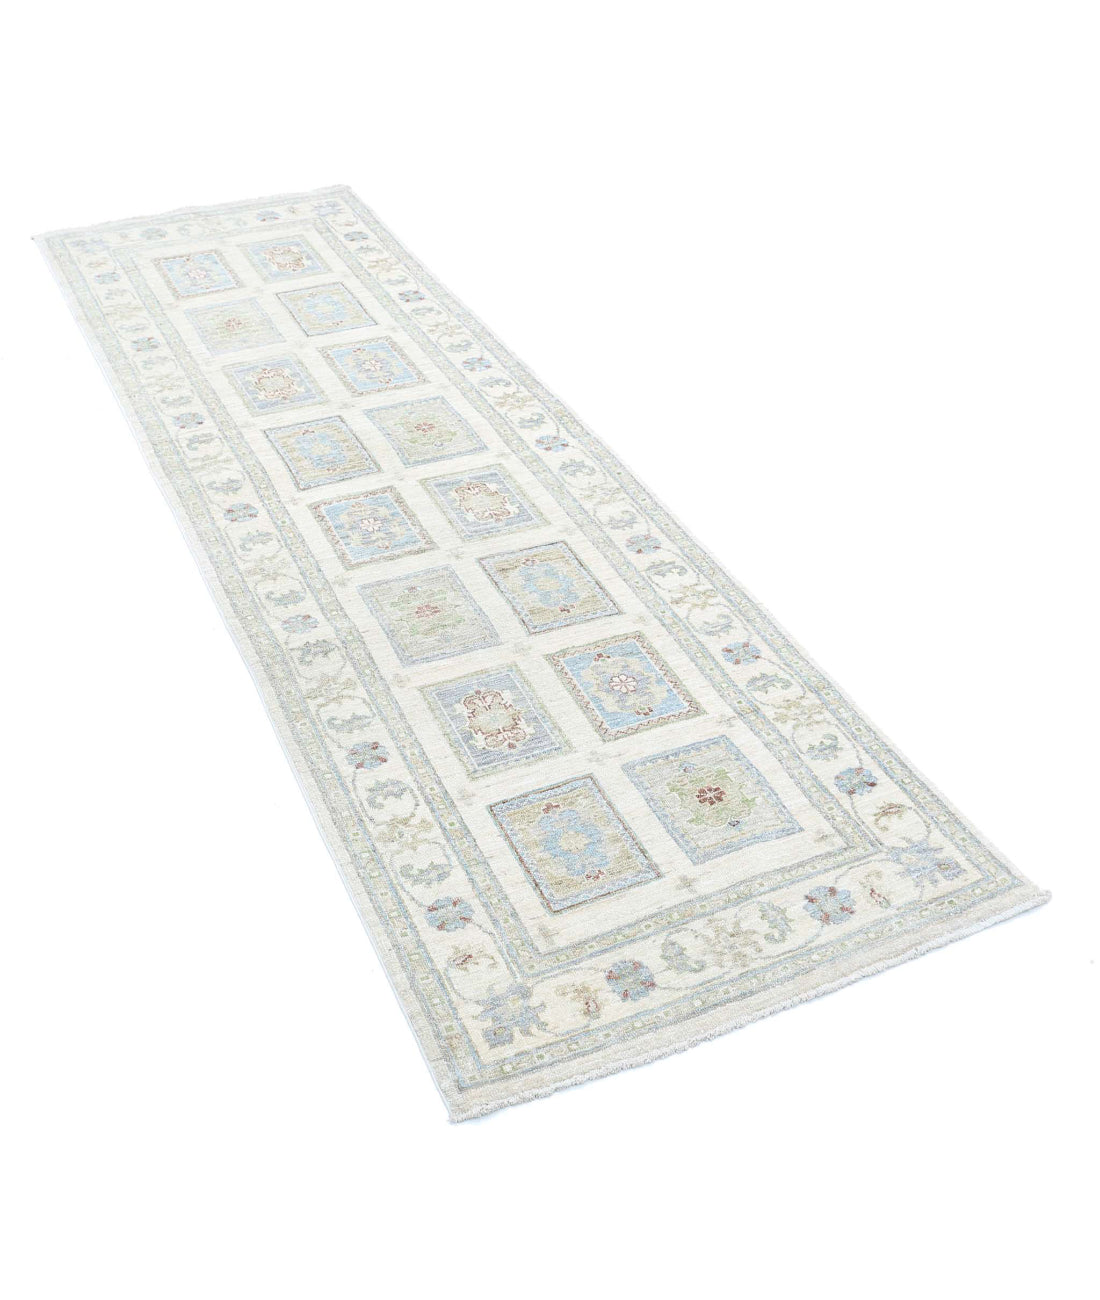 Hand Knotted Serenity Wool Rug - 2'6'' x 7'11'' 2'6'' x 7'11'' (75 X 238) / Ivory / Blue